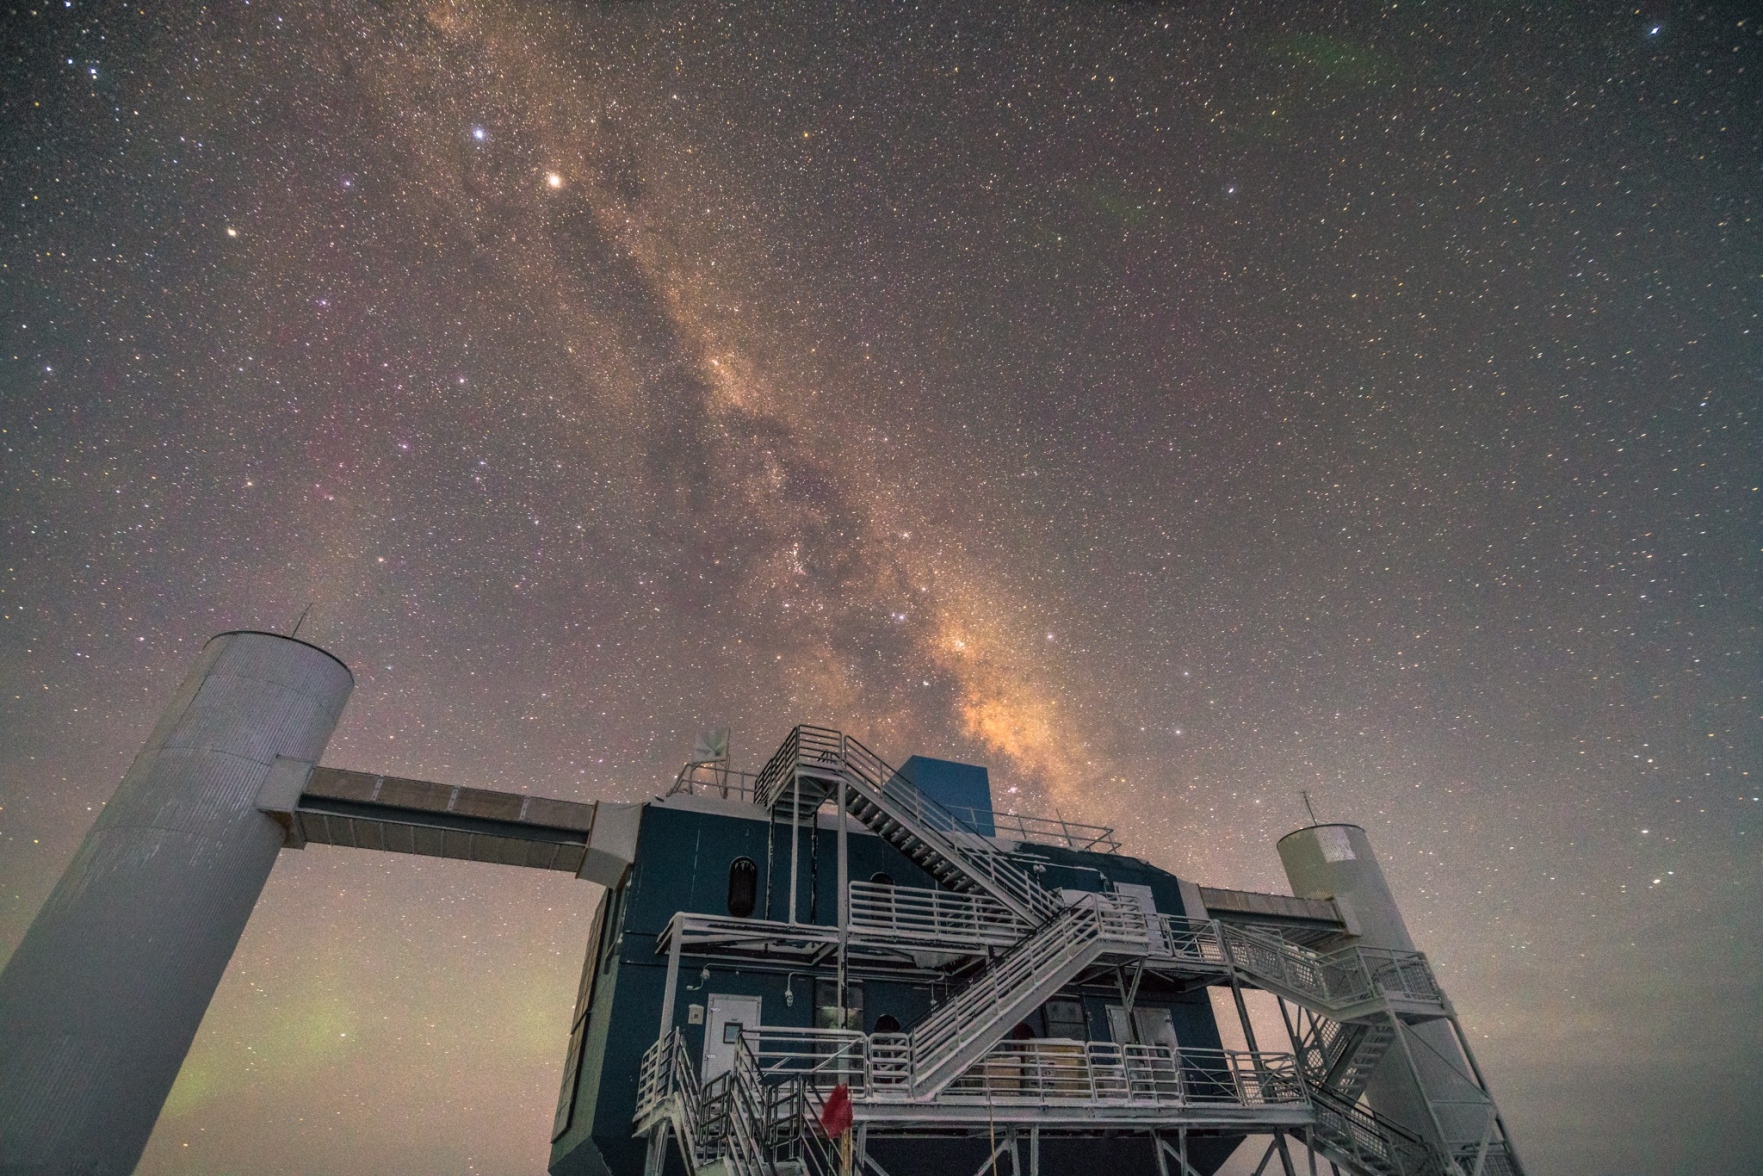 The first neutrino image of the Milky Way